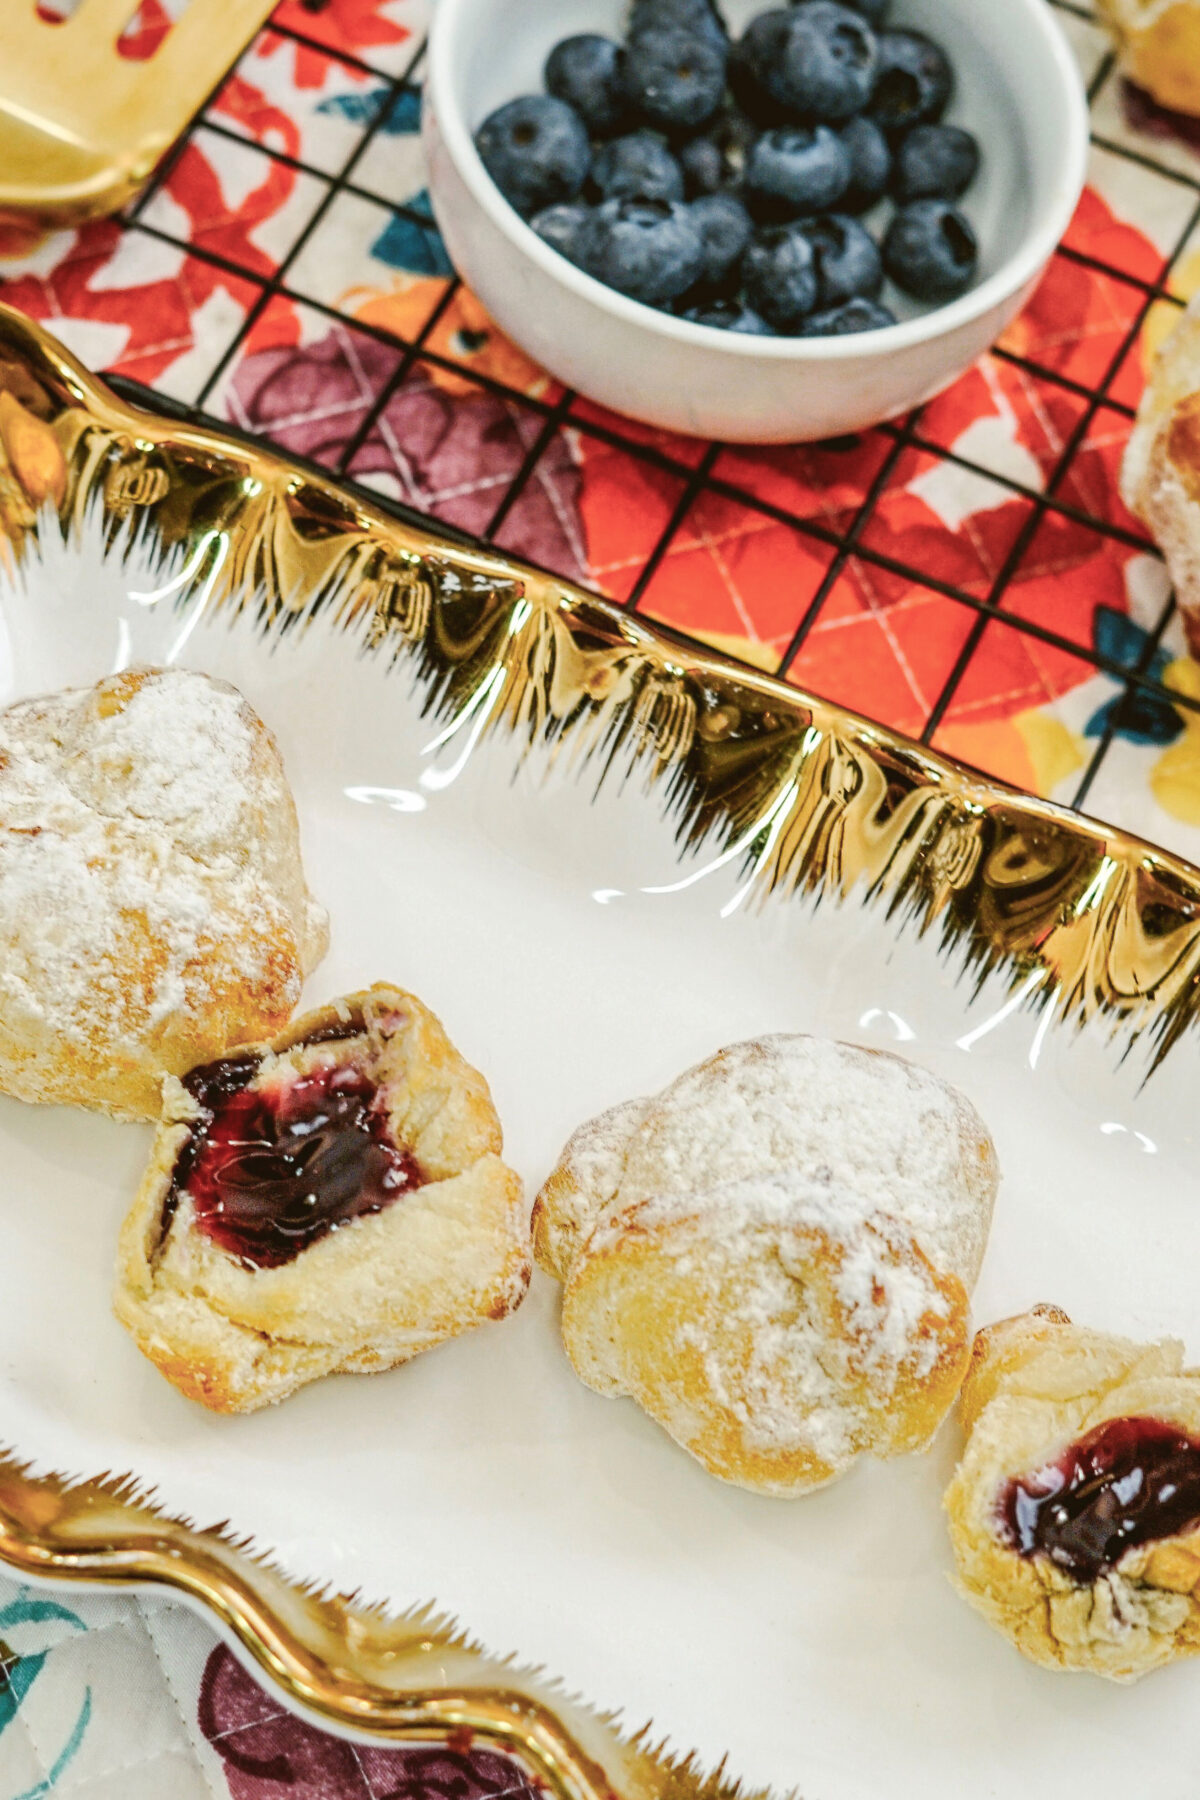 No need to wait in line for your favorite donut holes anymore! Make these delicious air fryer blueberry donut holes at home in minutes.